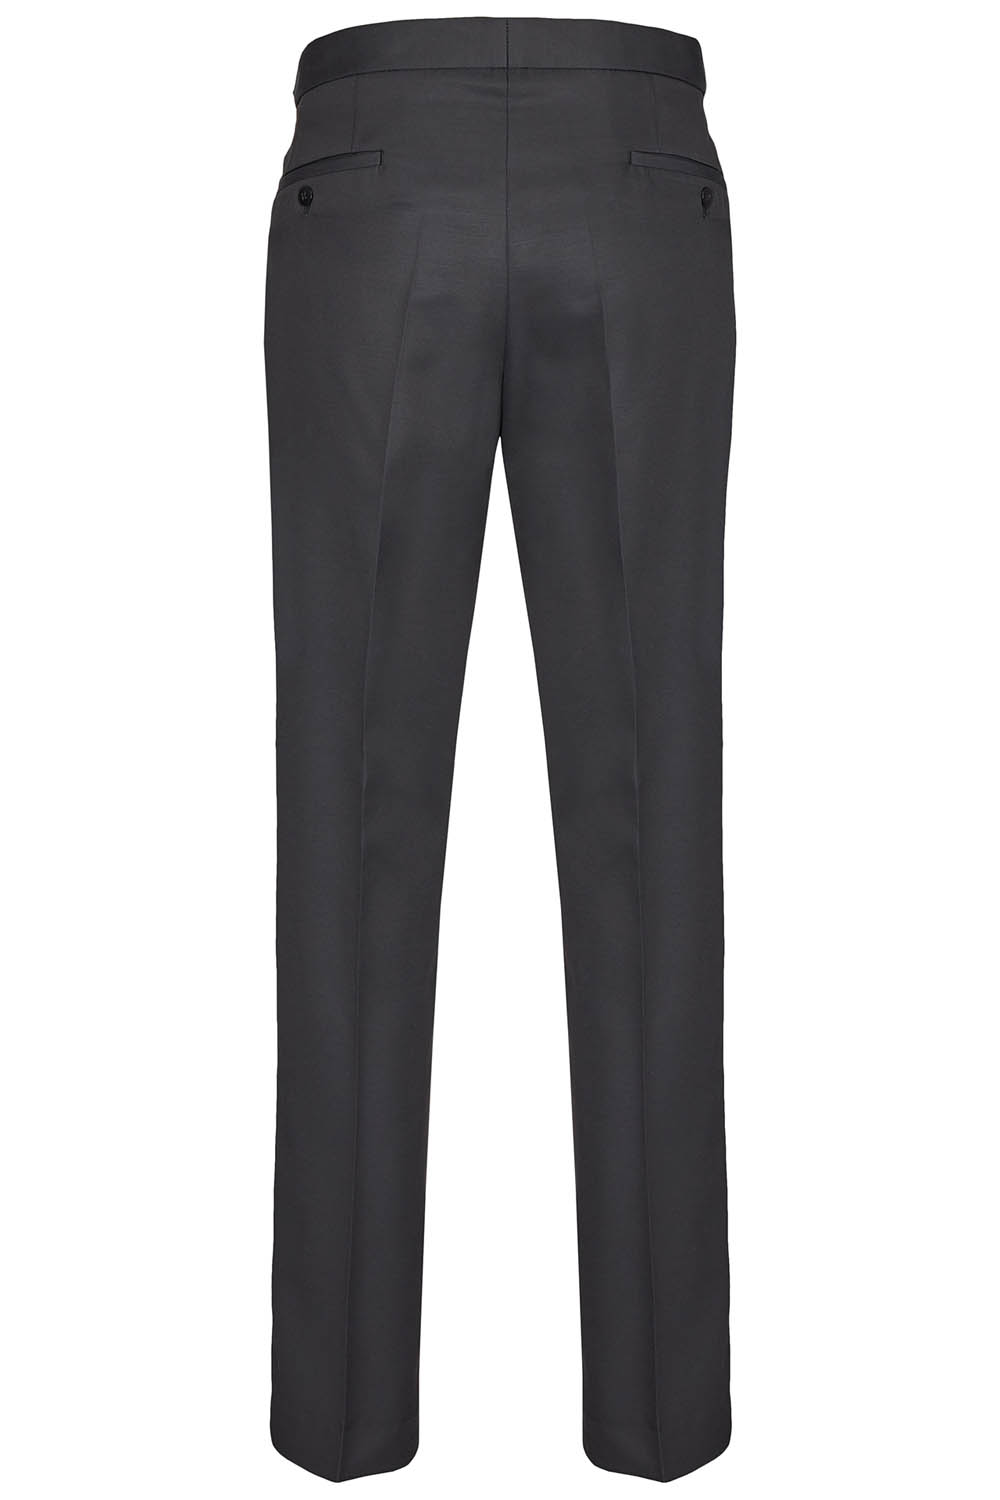 Royal Charcoal 3 Piece Suit - Tom Murphy's Formal and Menswear